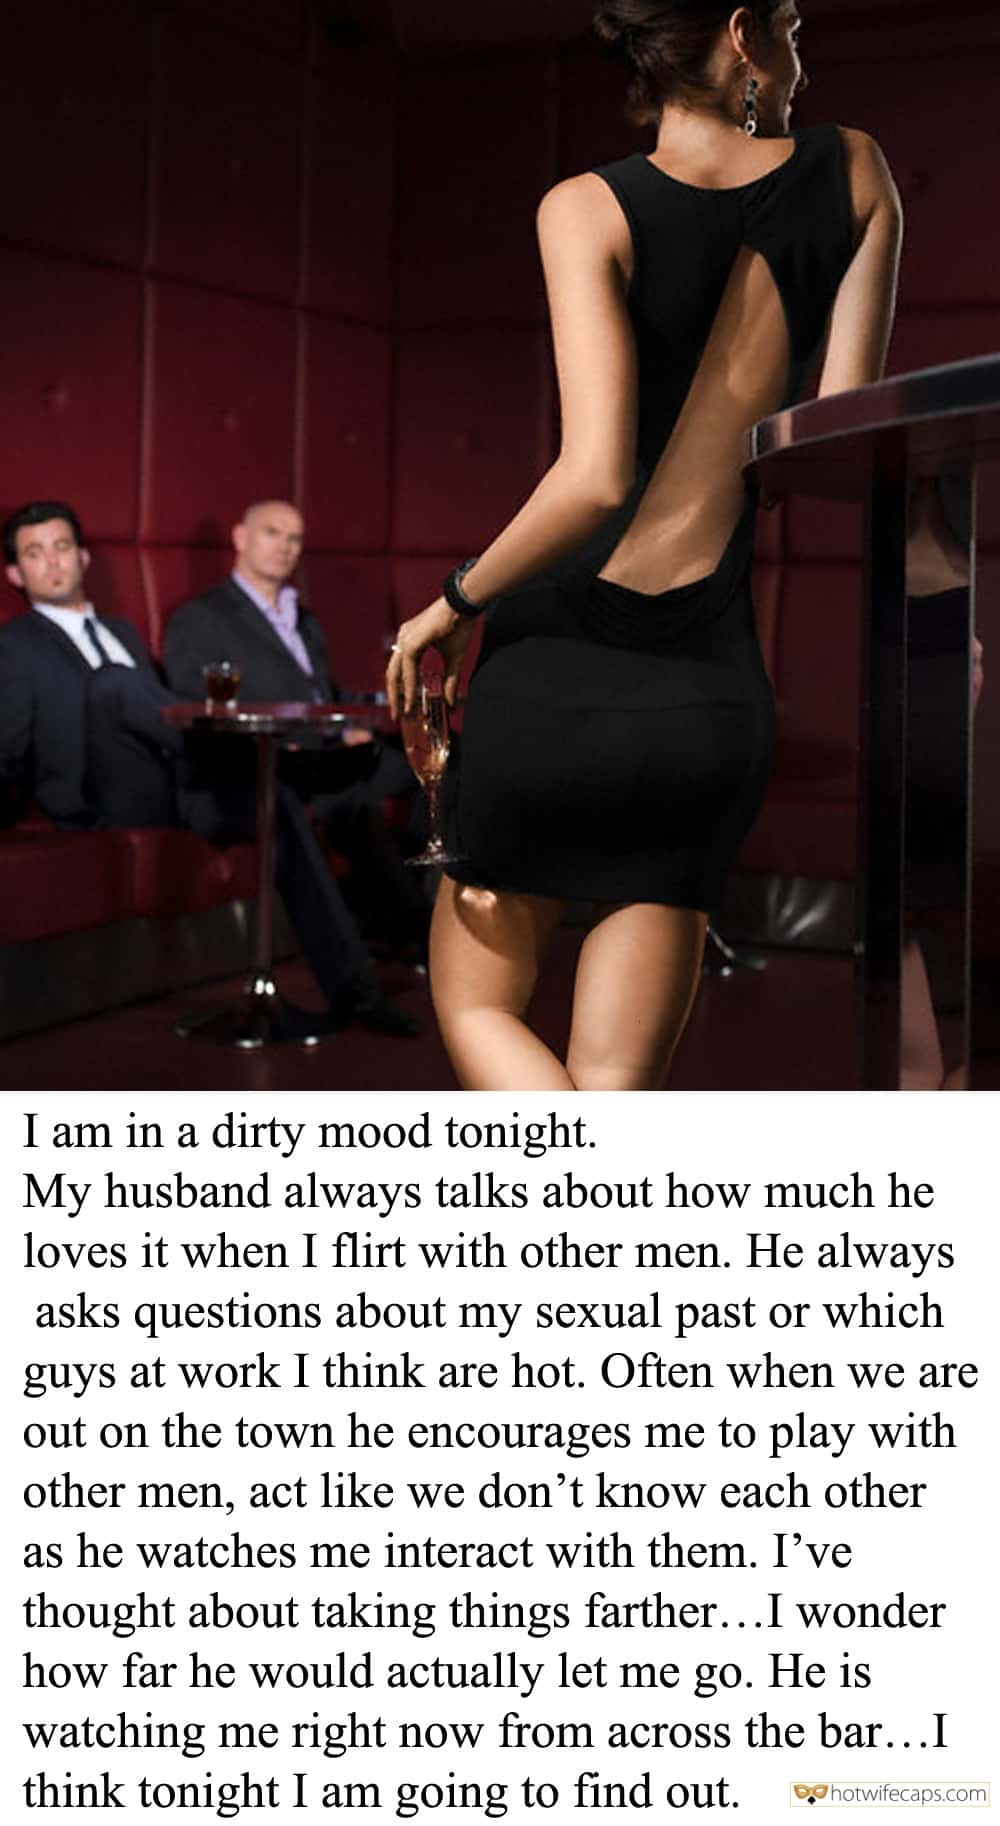 Sexy Memes Cuckold Stories hotwife caption: I am in a dirty mood tonight. My husband always talks about how much he loves it when I flirt with other men. He always asks questions about my sexual past or which guys at work I think are hot....